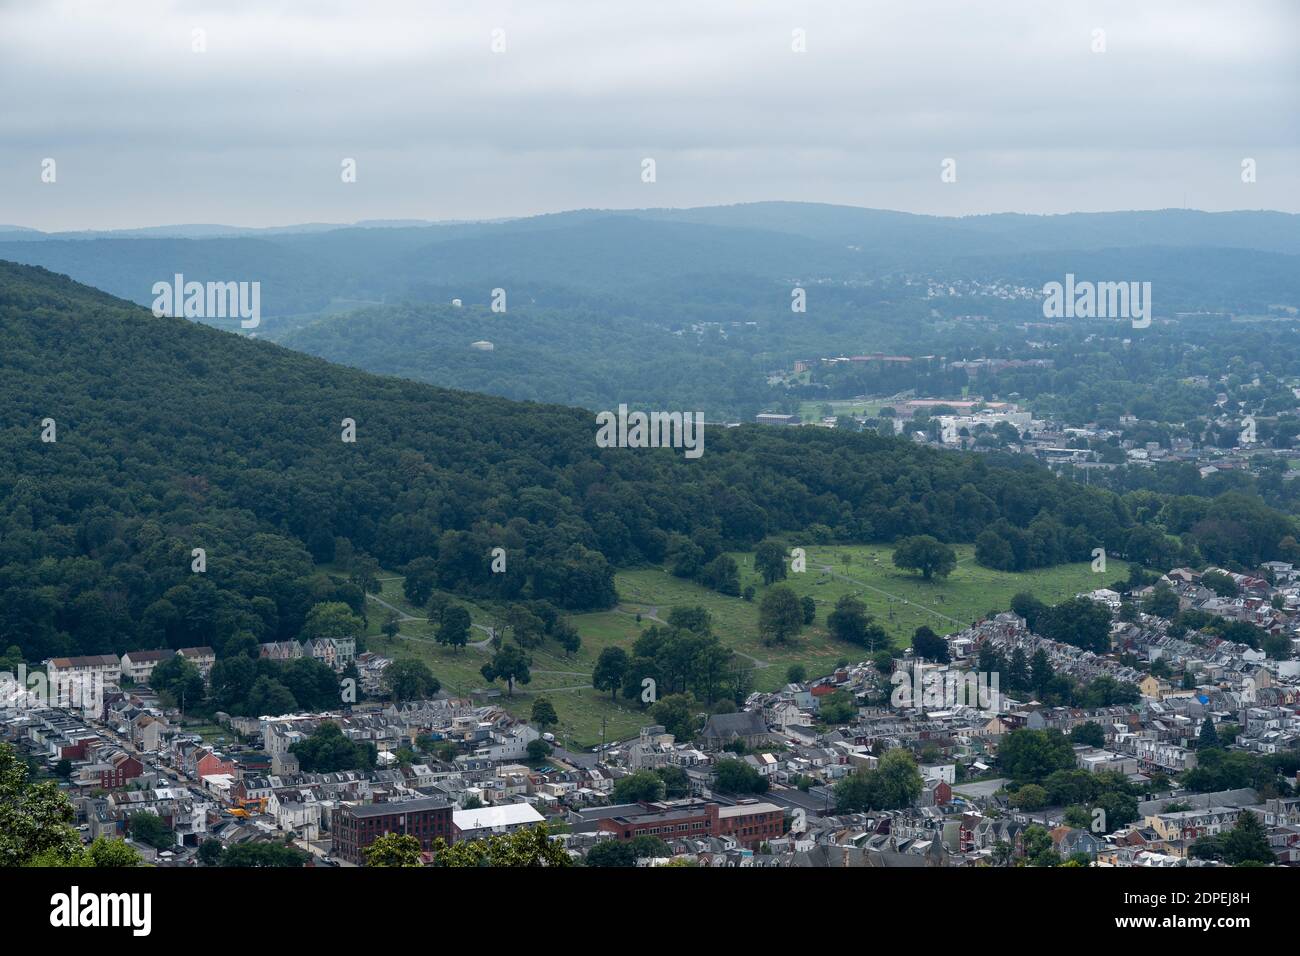 A high angle view of the city of Reading, Pennsylvania Stock Photo